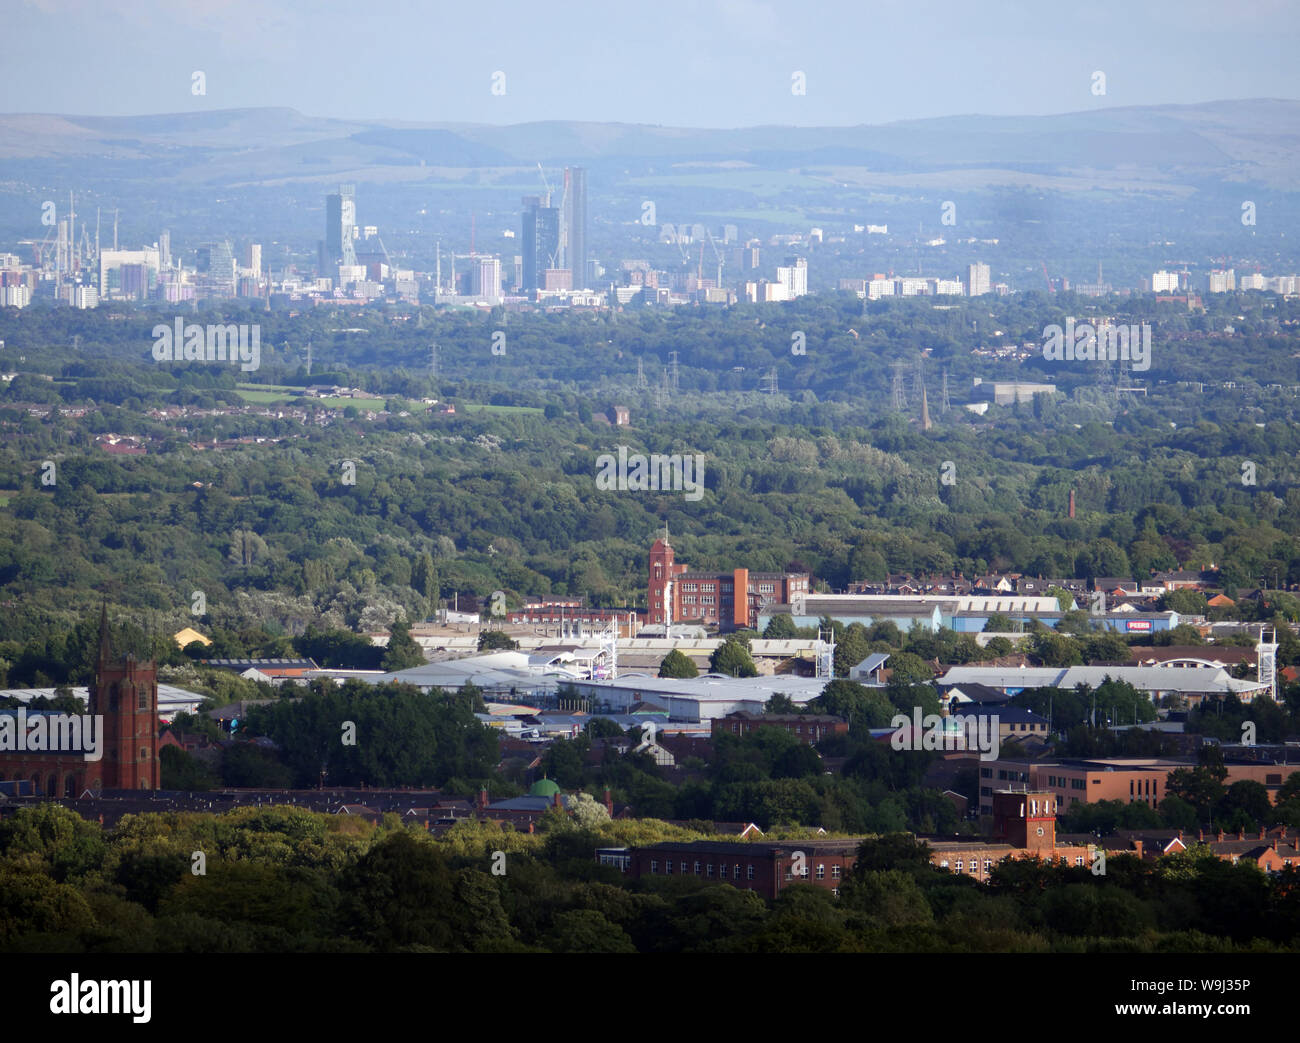 View looking over the town of Bolton with the city Manchester in the distance. photo DON TONGE Stock Photo